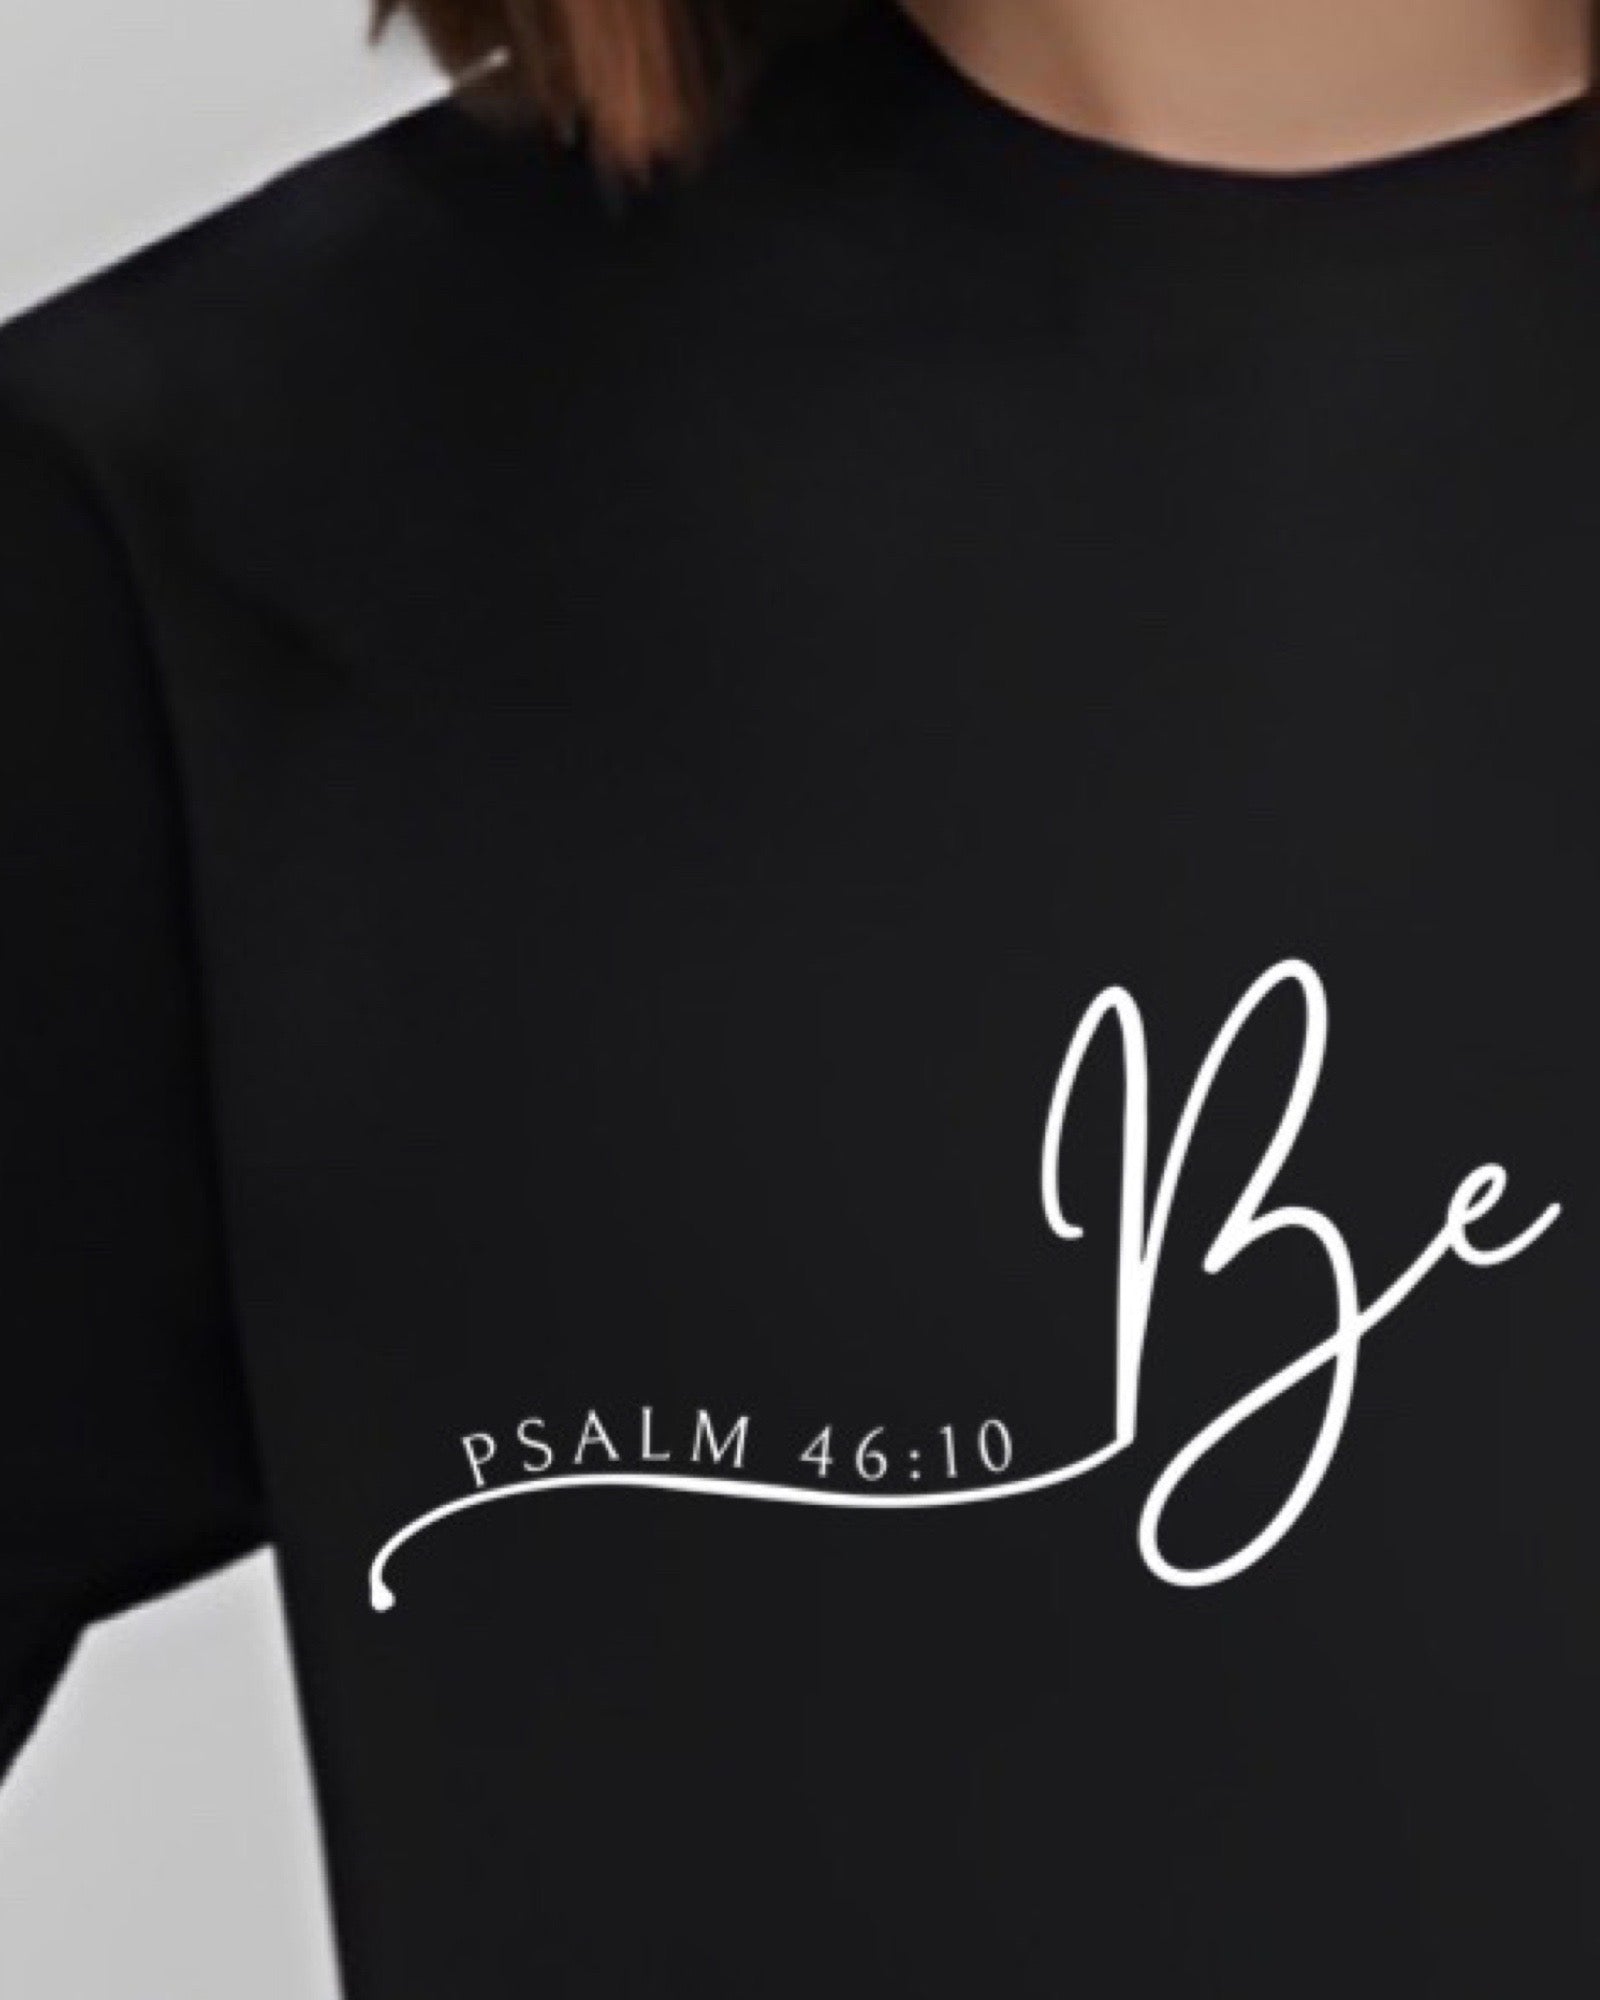 Be Still and Know that I am God - Christian T-shirt close up